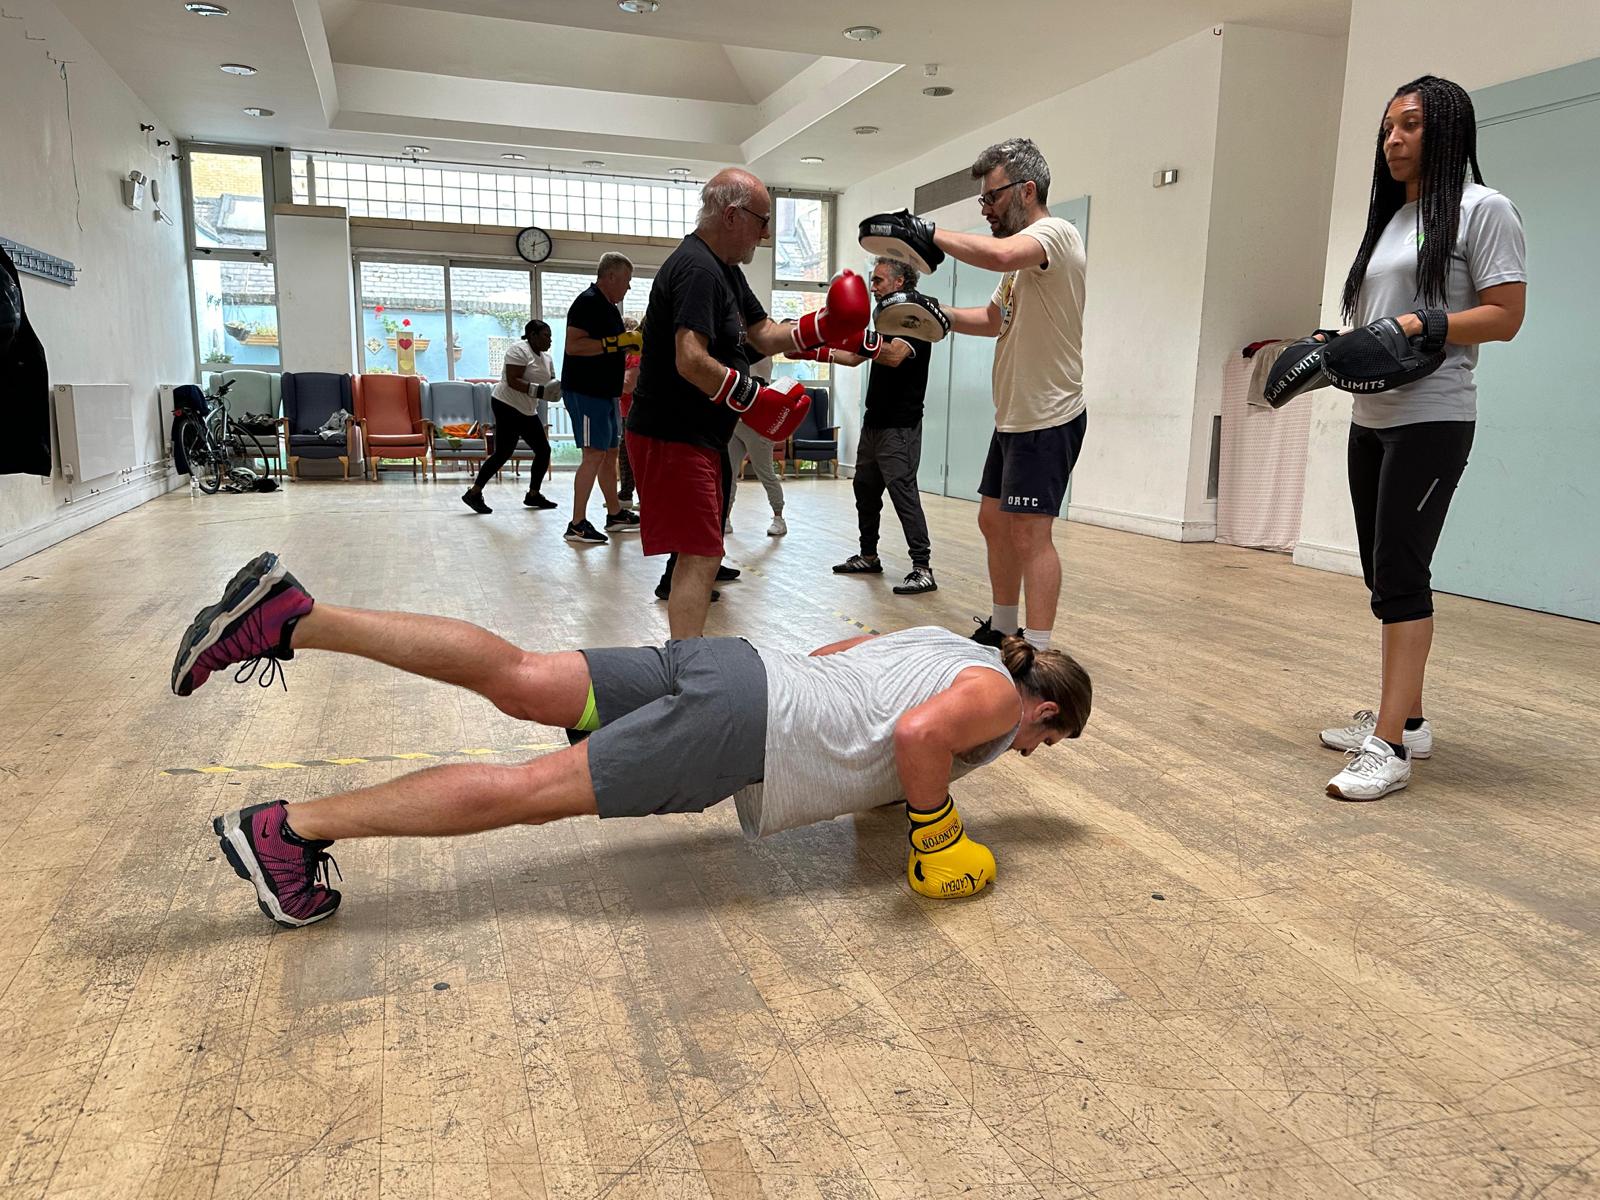 Boxing Fitness for Adults with or at Risk of Type 2 Diabetes